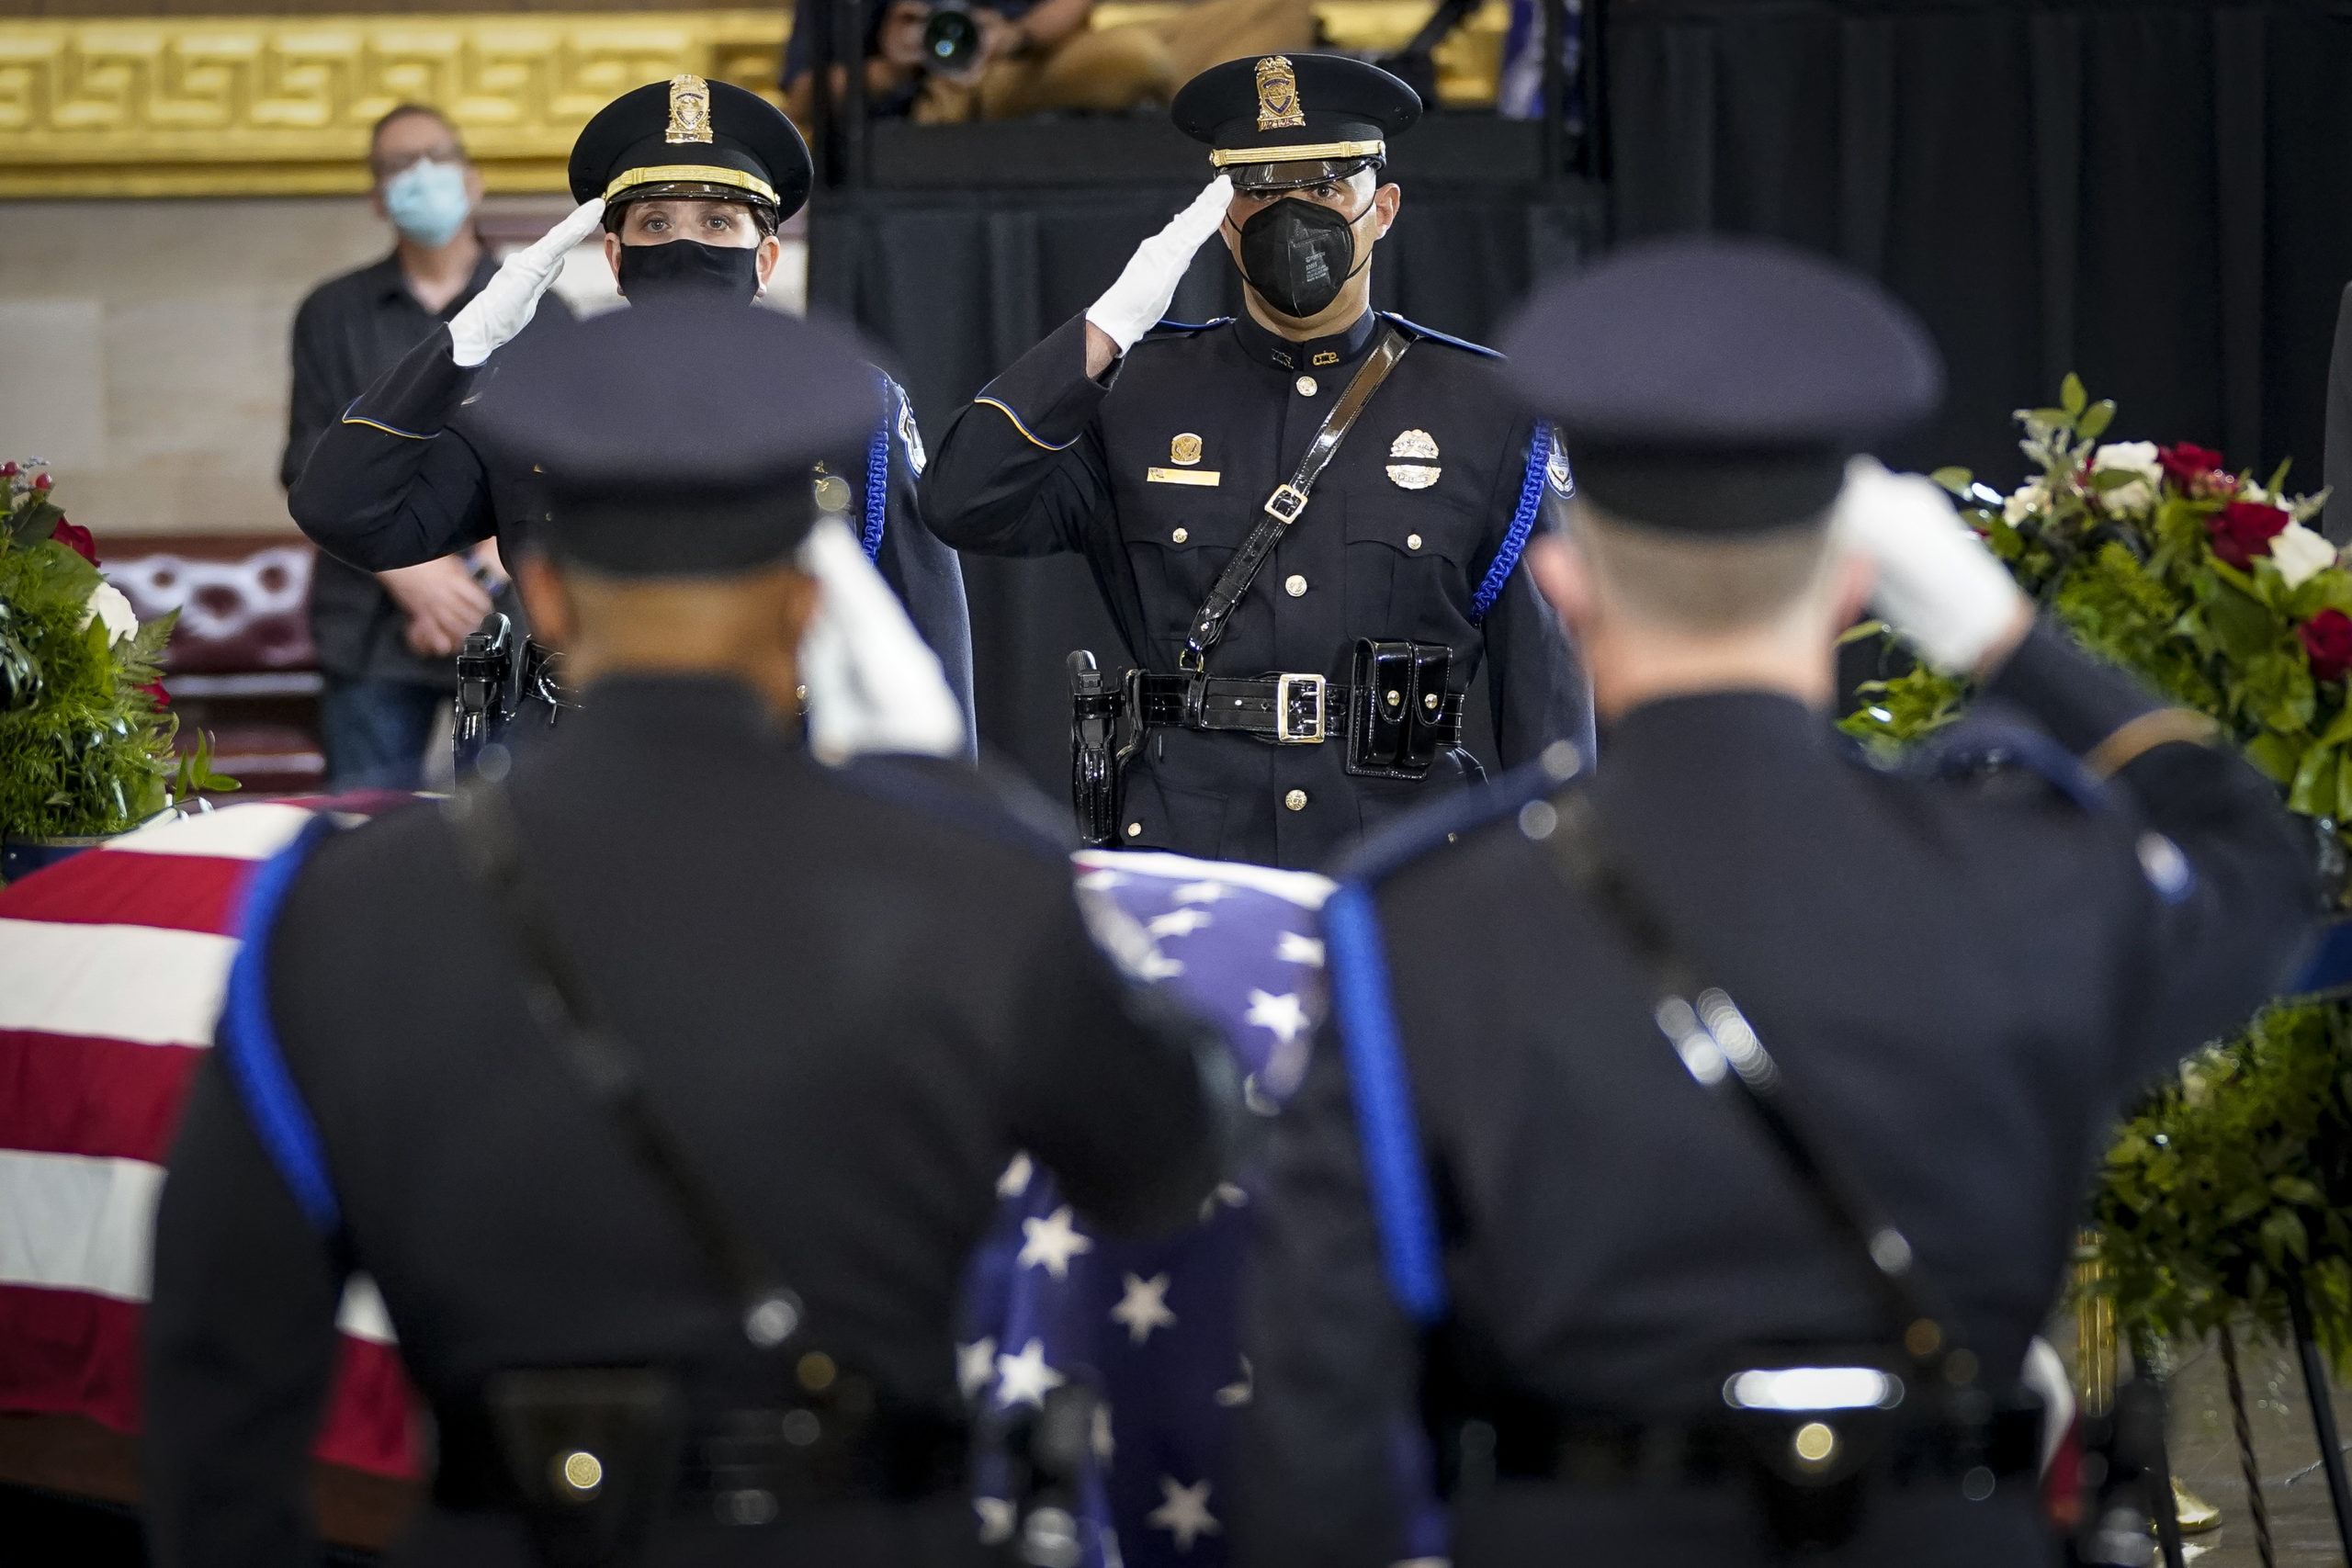 Members of a Capitol Police honor guard salute at the casket of the late U.S. Capitol Police officer William "Billy" Evans during a memorial service. (Photo by Drew Angerer/Getty Images)